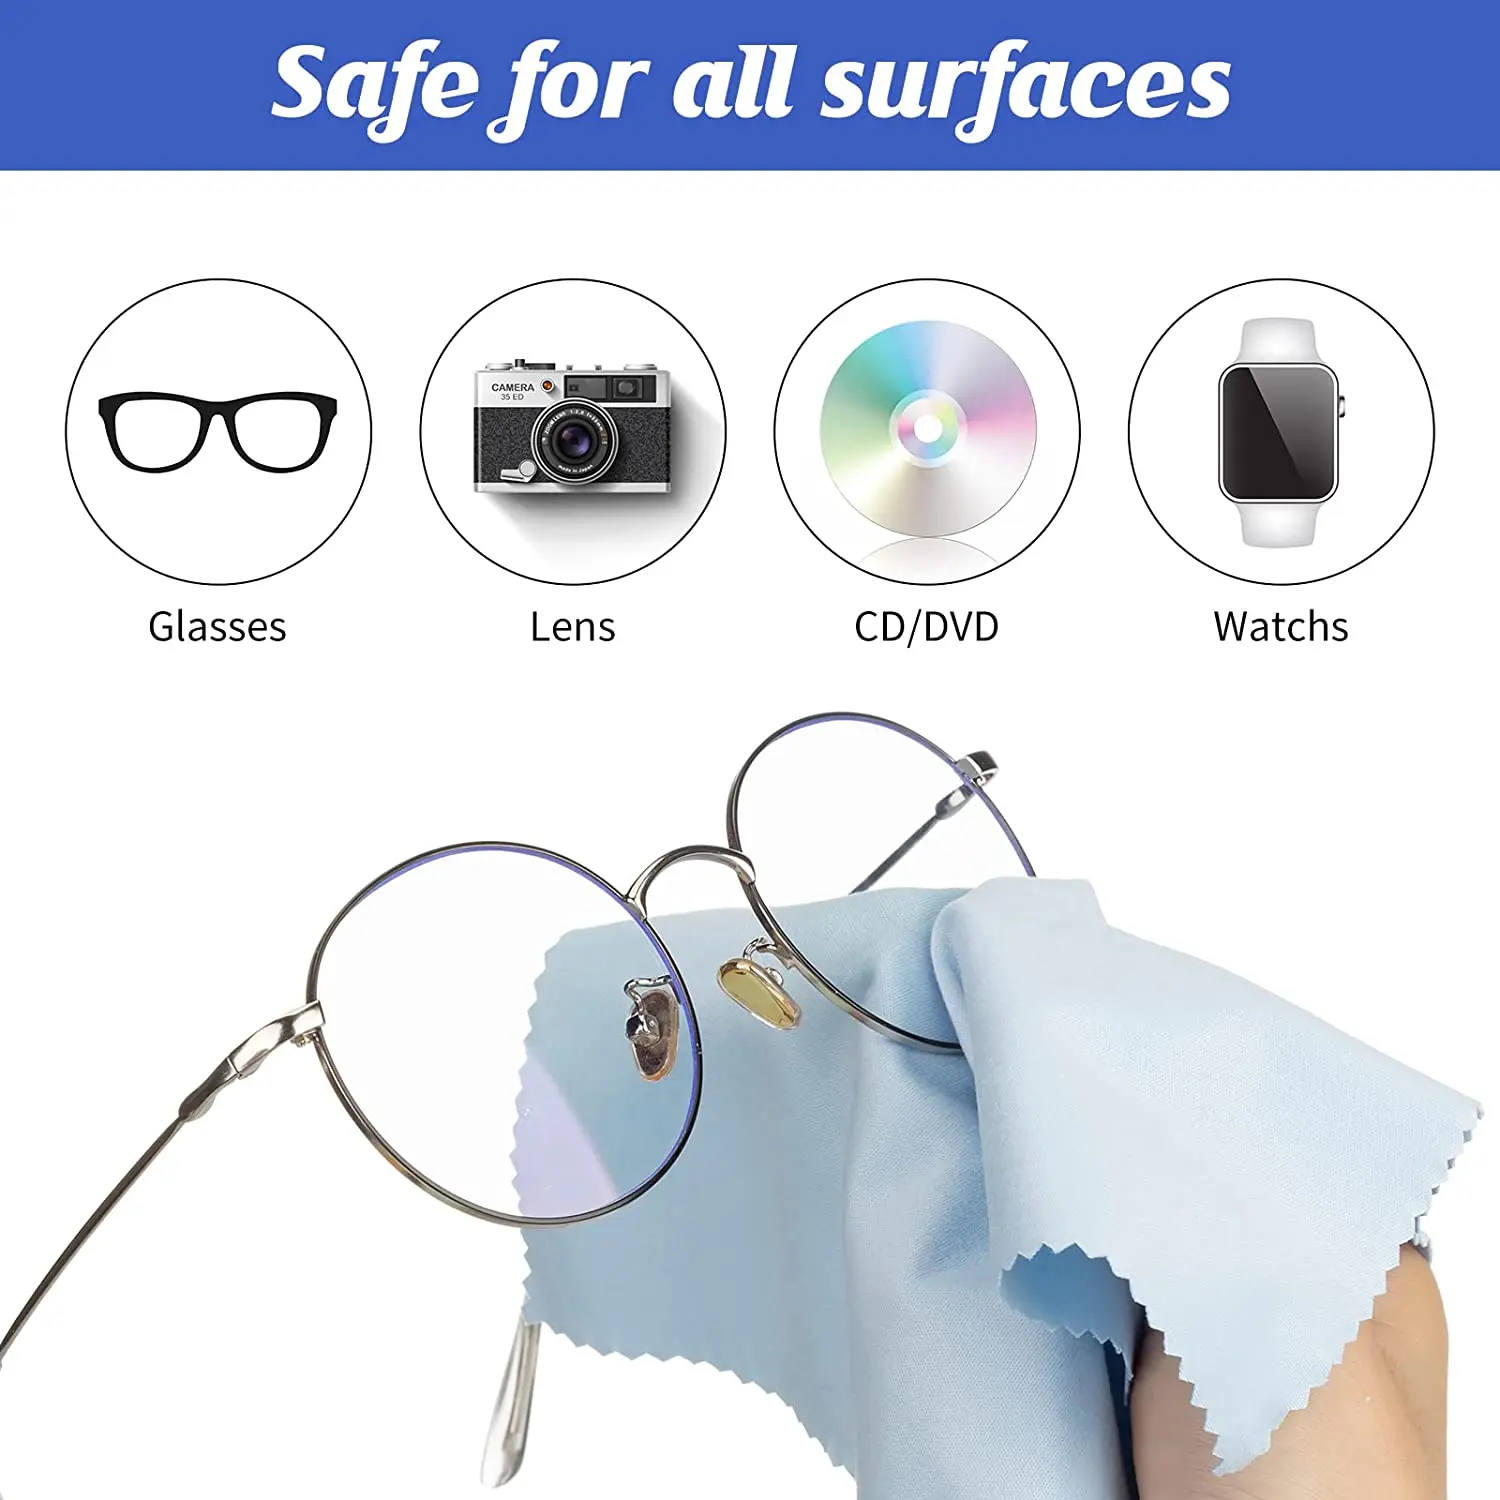 25Pcs High-quality Microfiber Glasses Cleaning Cloth Lens Glasses Cleaner Mobile Phone Screen Cleaning Wipes Eyewear Accessories images - 6